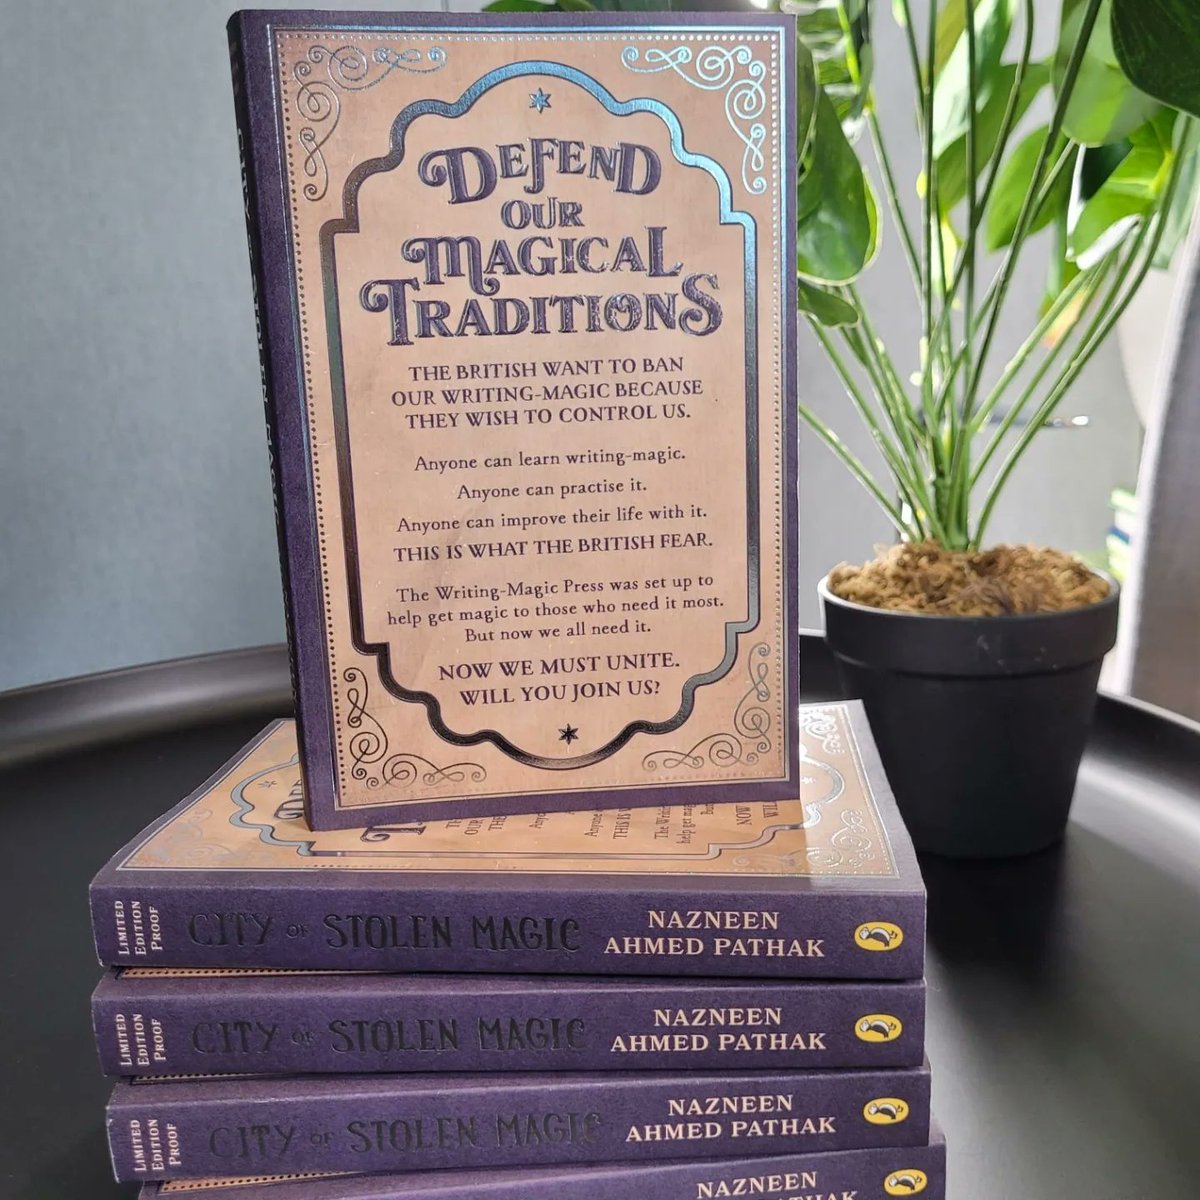 Yesterday I got to meet the proof of #CityofStolenMagic in person for the first time. It's beautiful. My sleep deprived daydream from a decade ago is now this gorgeous, glimmering book. Thank you to @LLMonts @nldoherty and everyone @PuffinBooks for giving it a home in the world.